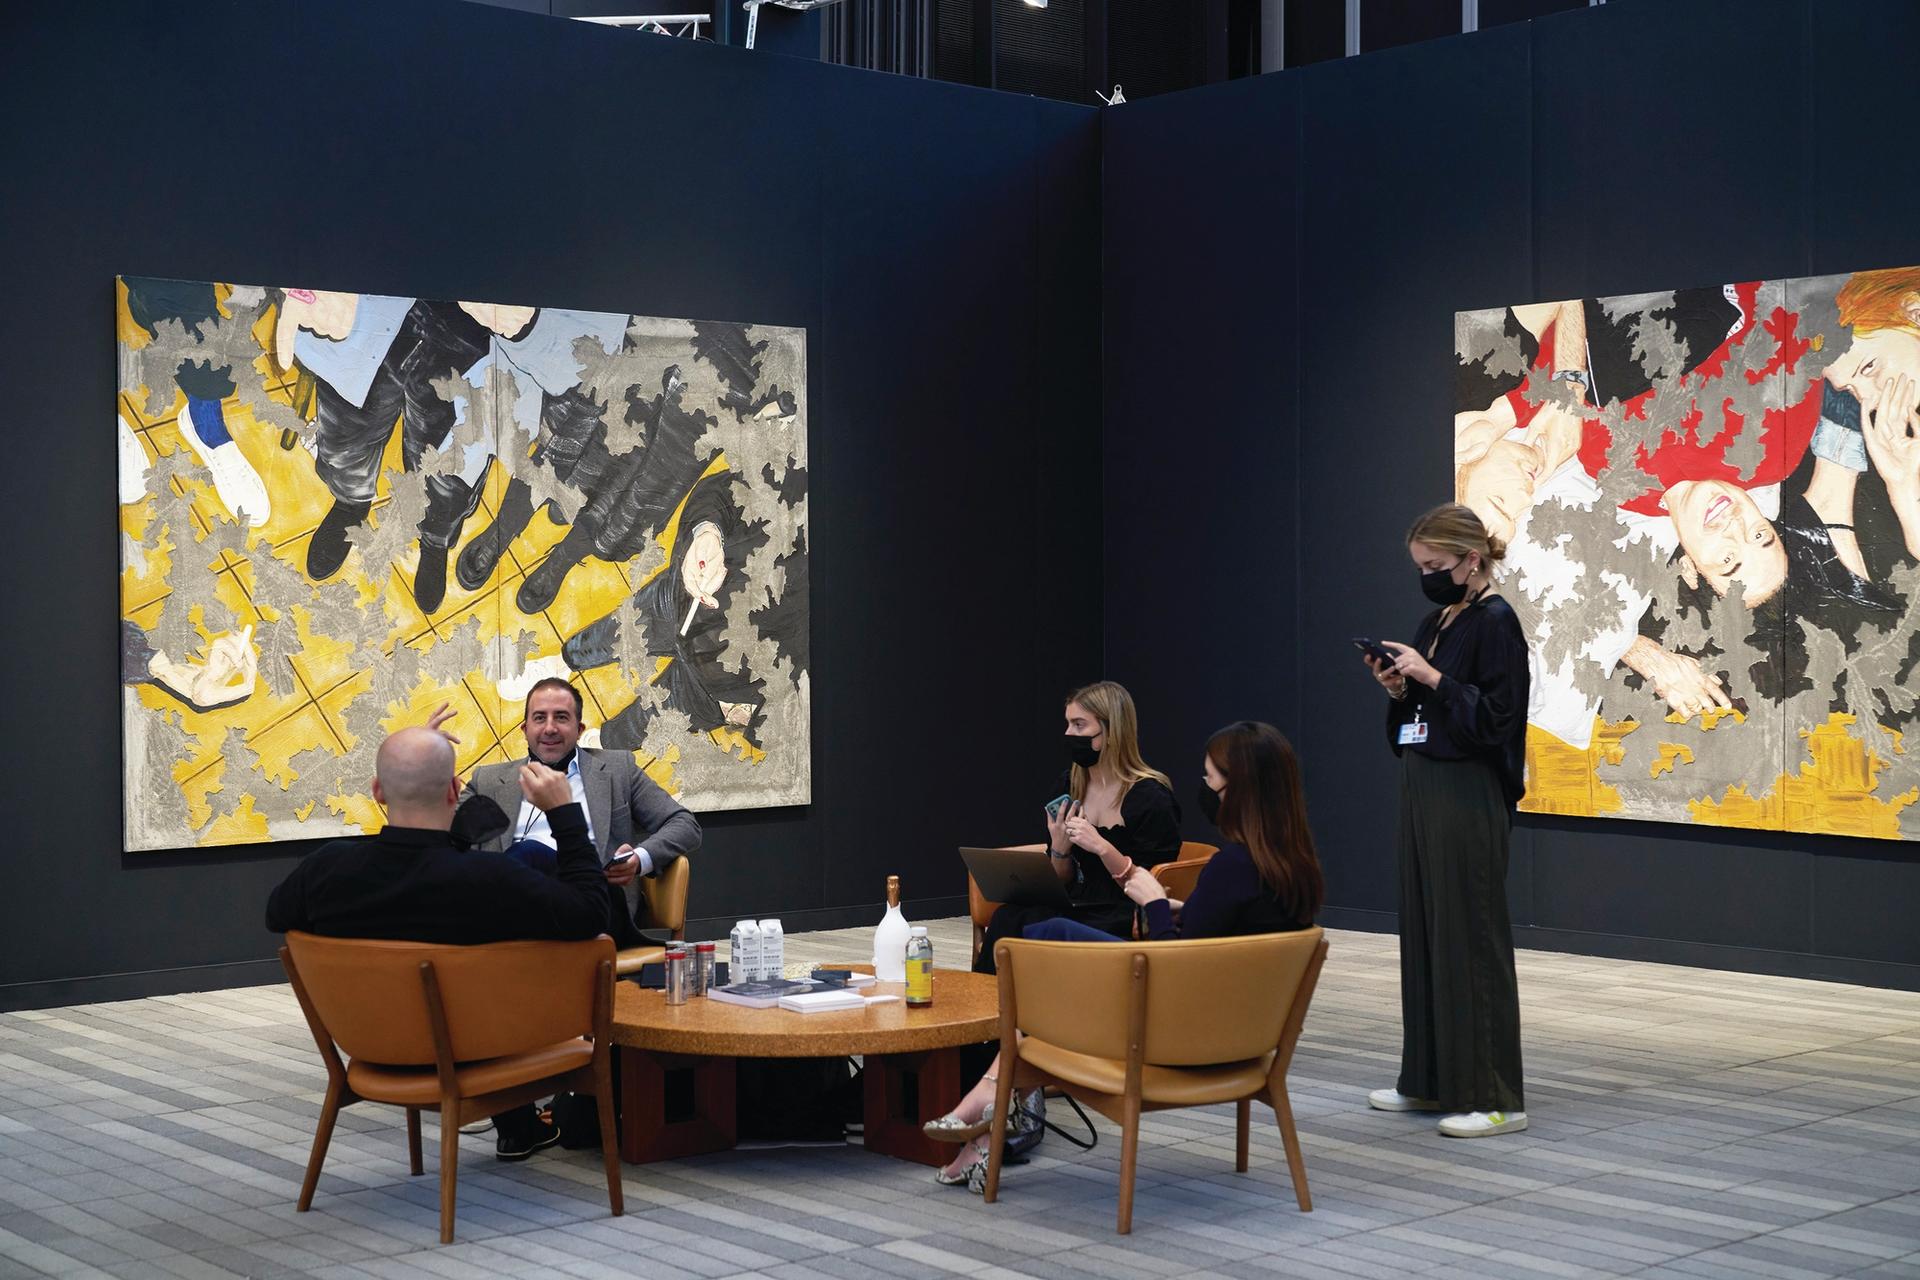 Pace’s stand is showing works by Latifa Echakhch that vividly capture nightlife scenes of cigarettes being ashed and arms flailing Photo by Allison Dinner